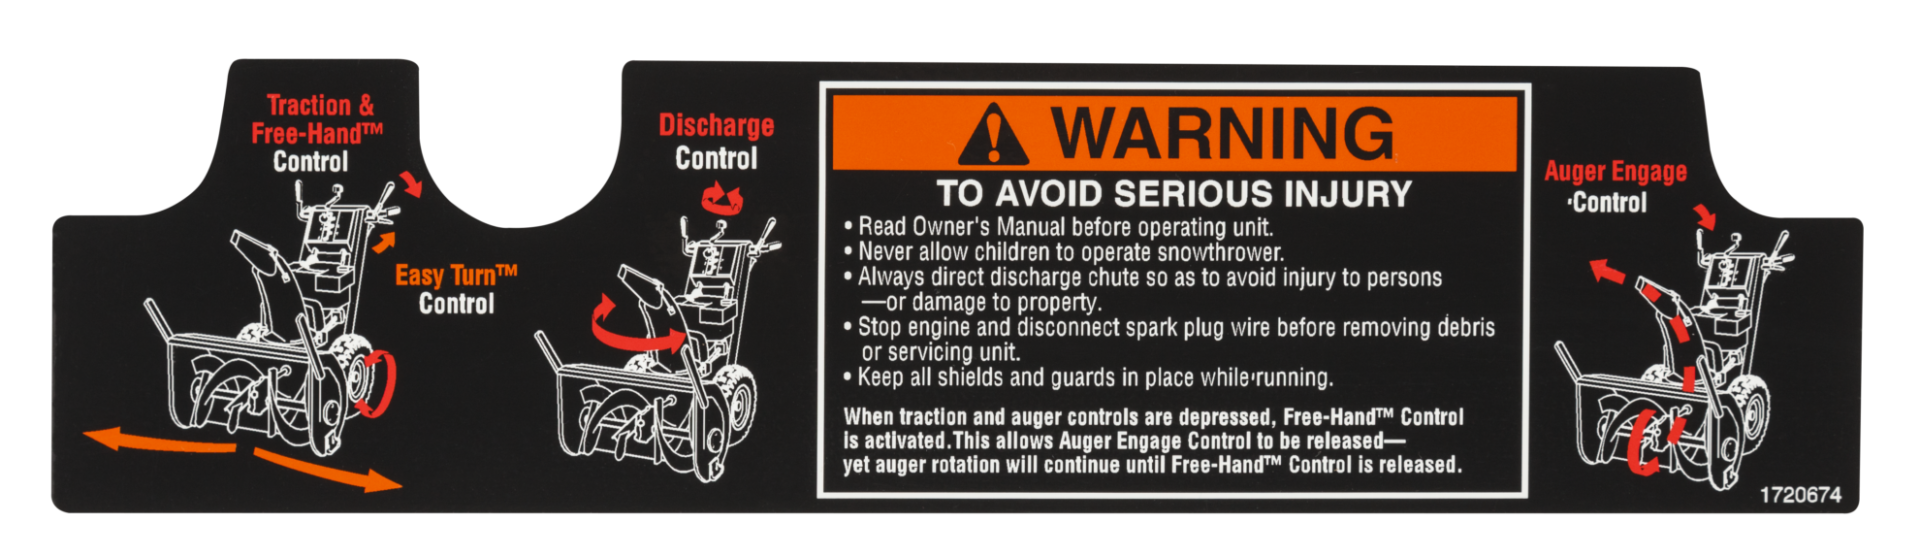 04252019Serigraph 71 e1561484170756 - Power/Outdoor Warning Label